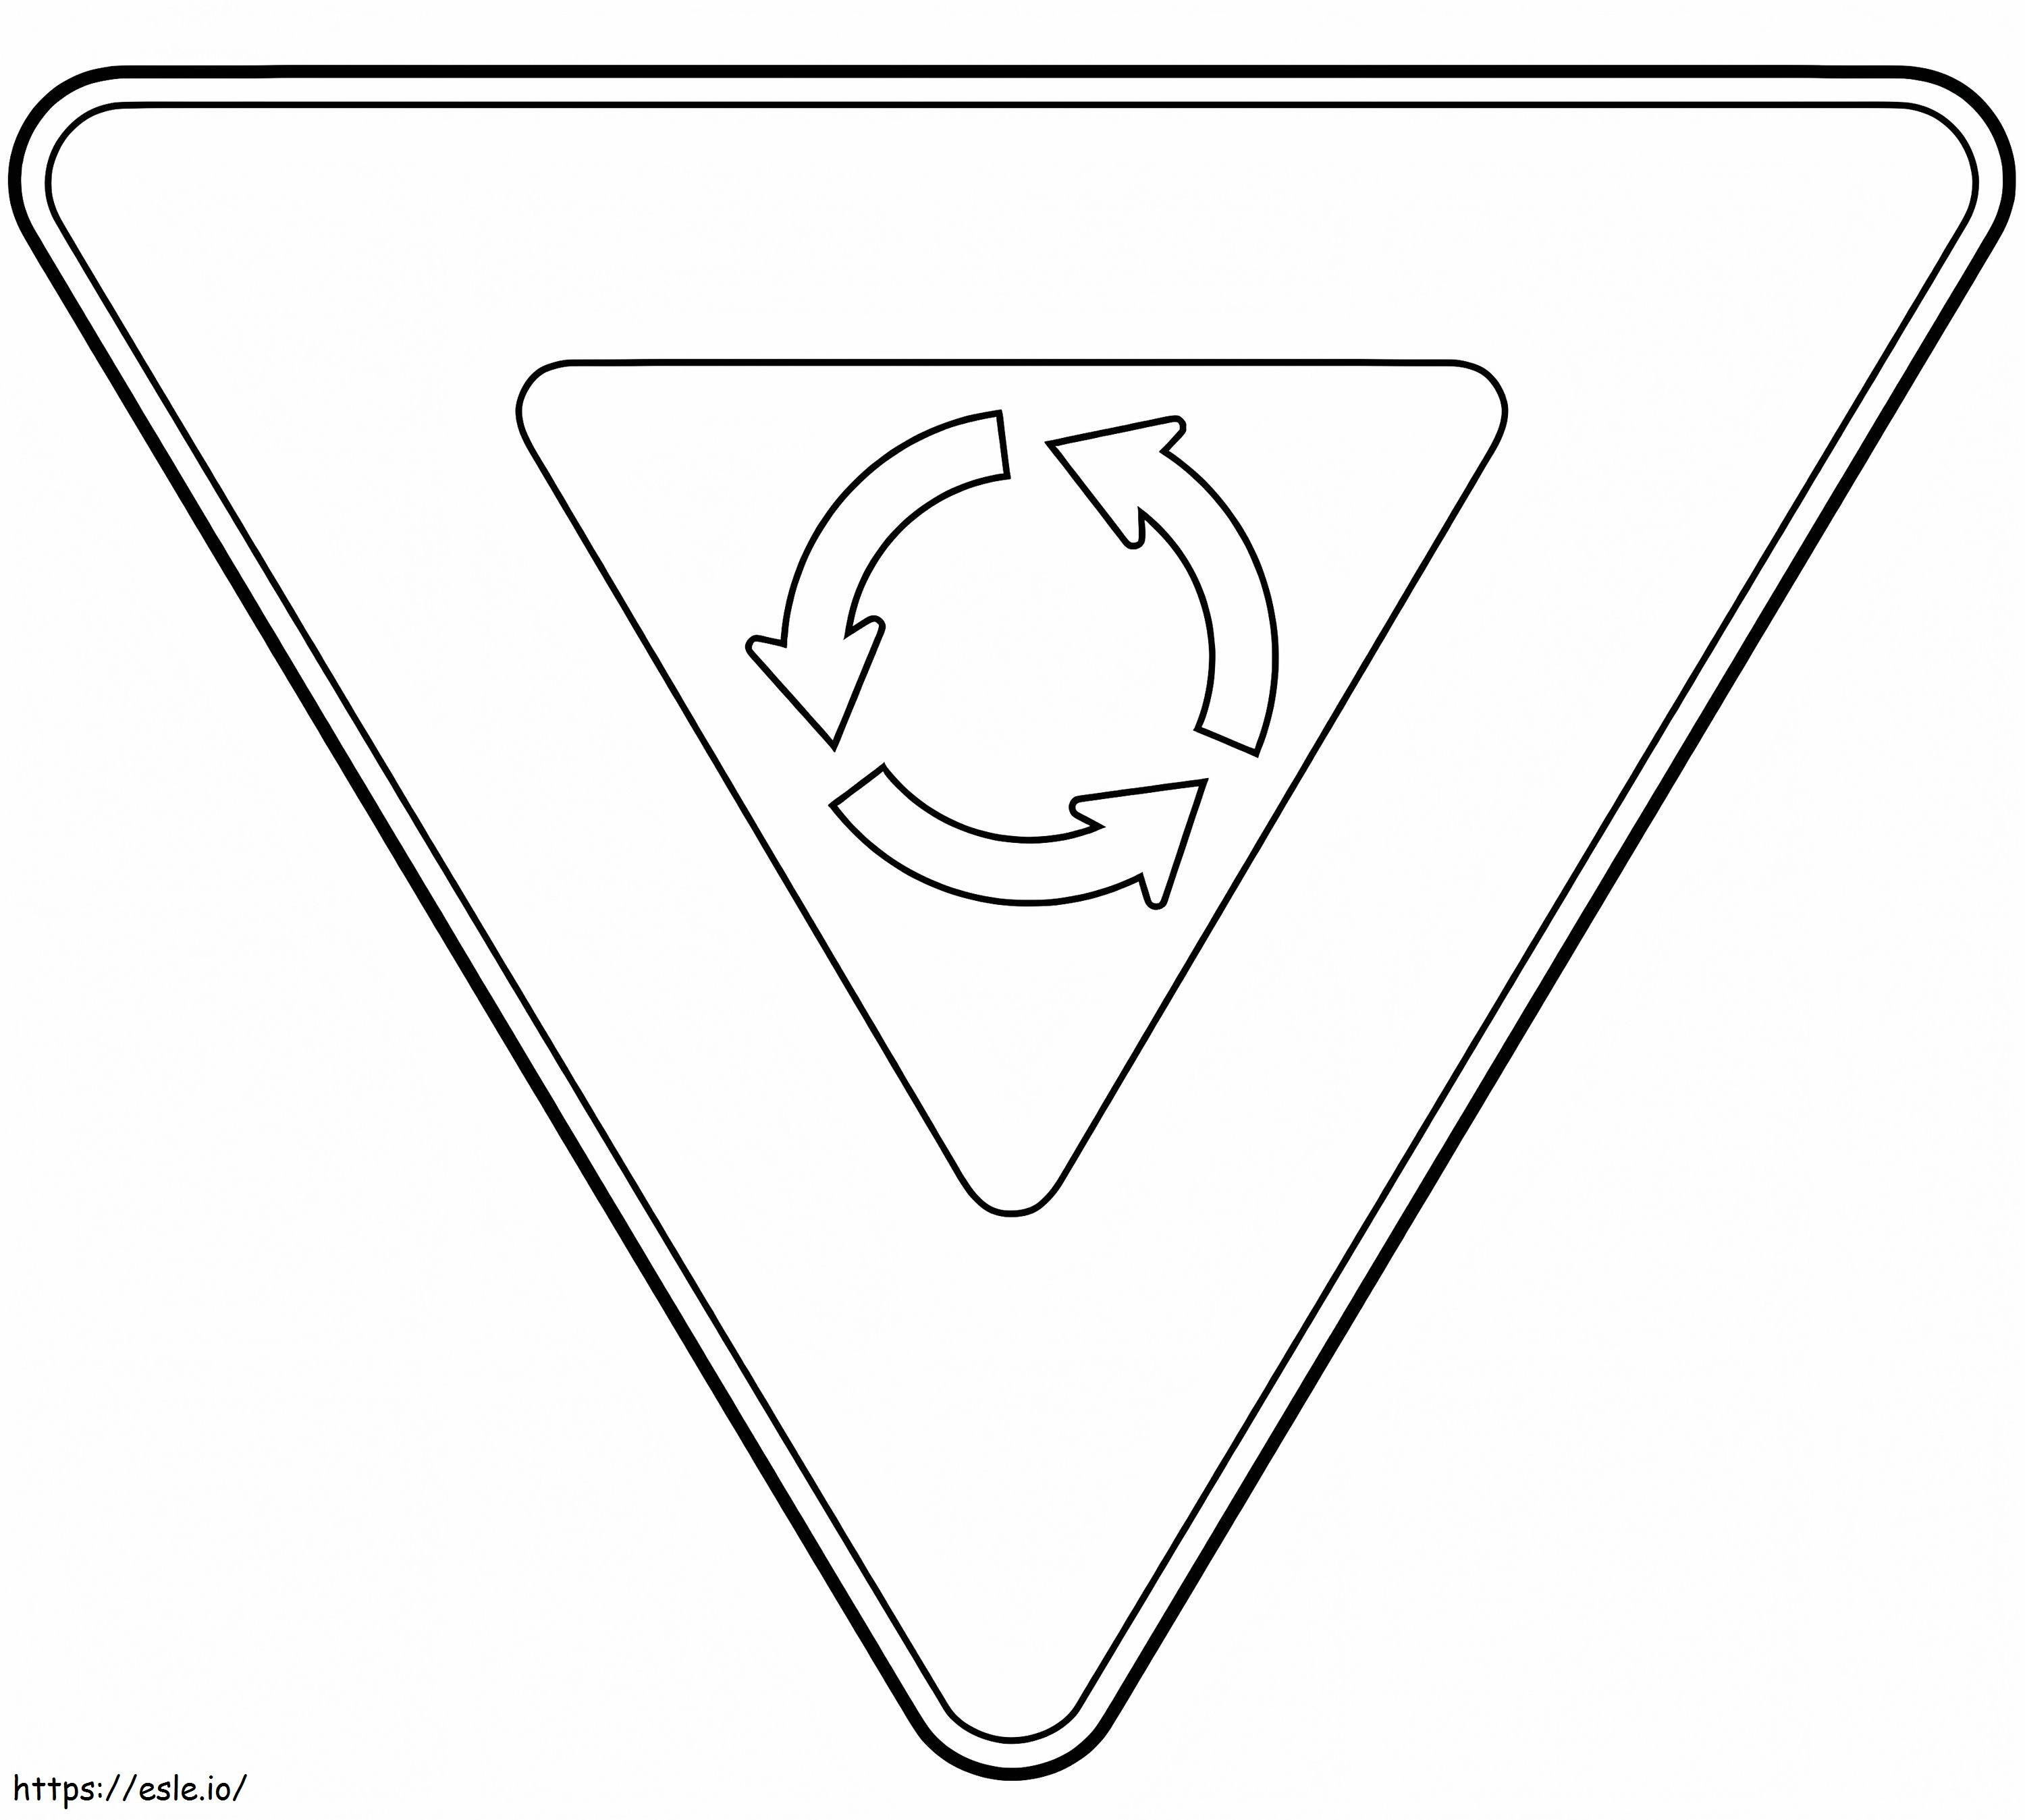 Road Safety Give Way Sign coloring page